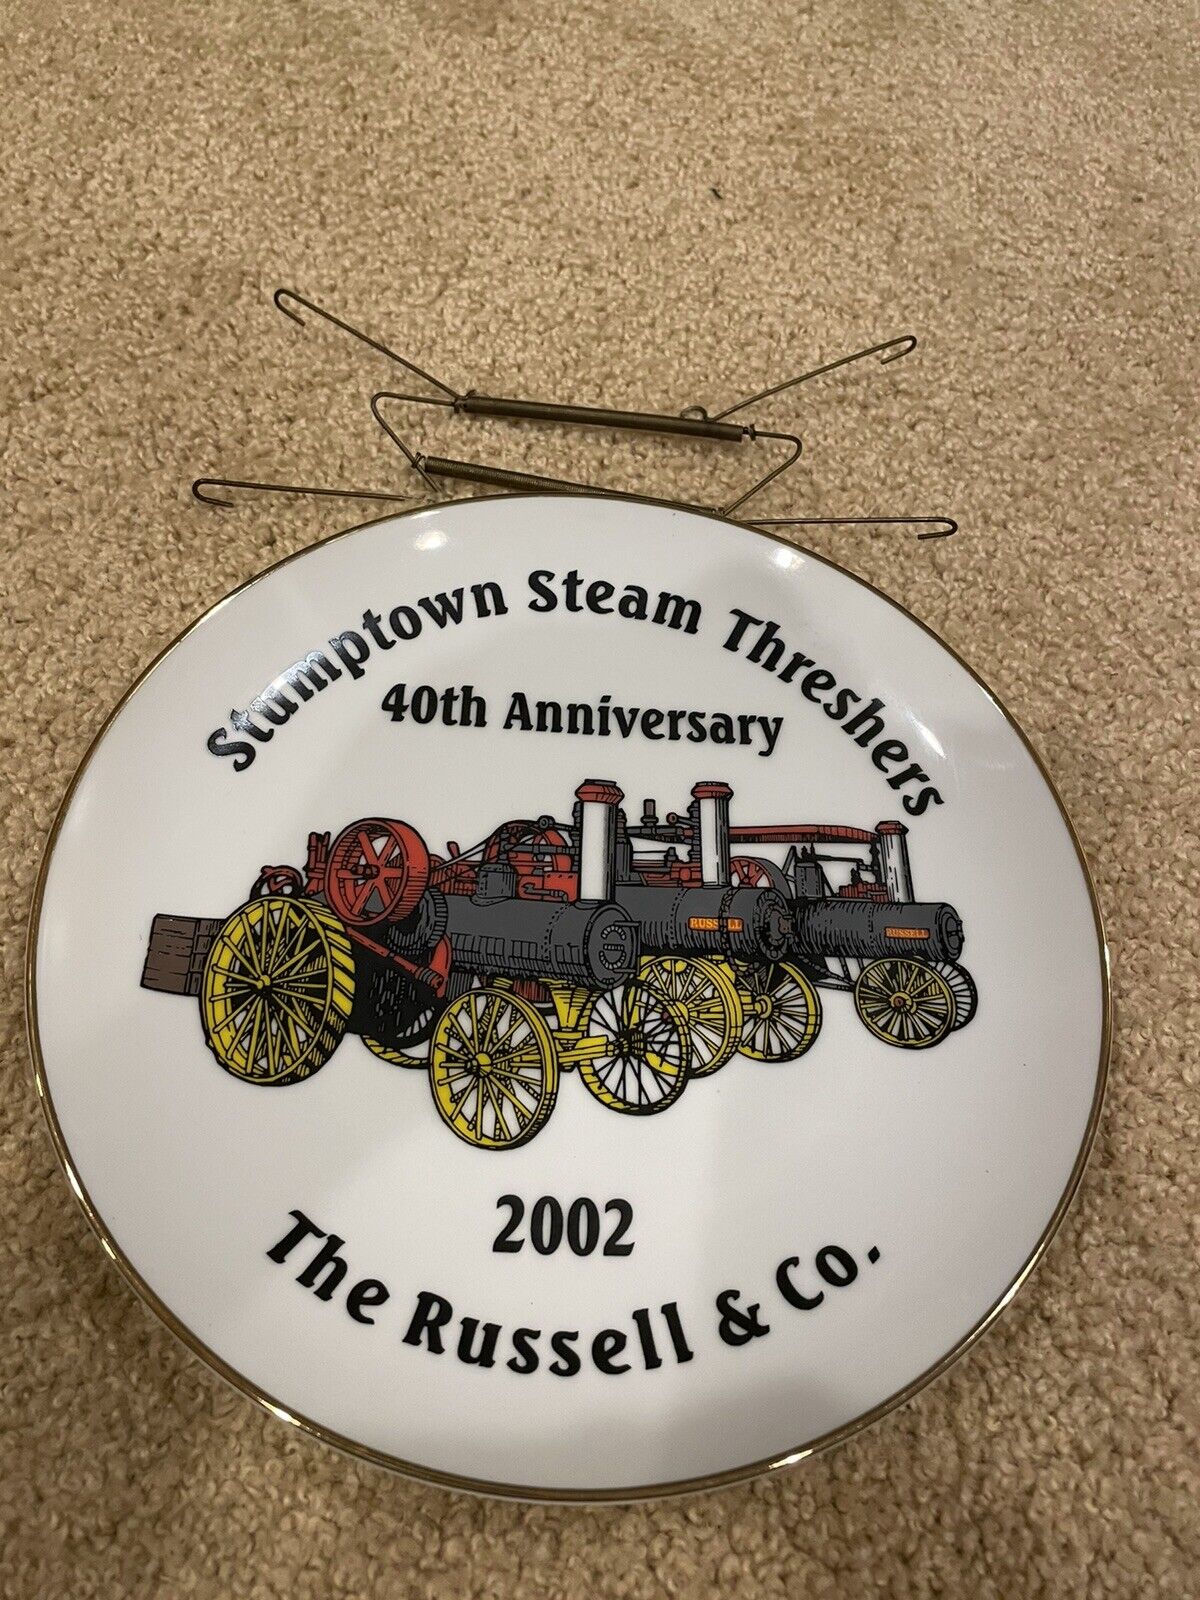 Stumptown steam threshers, the Russell & Co, Plate